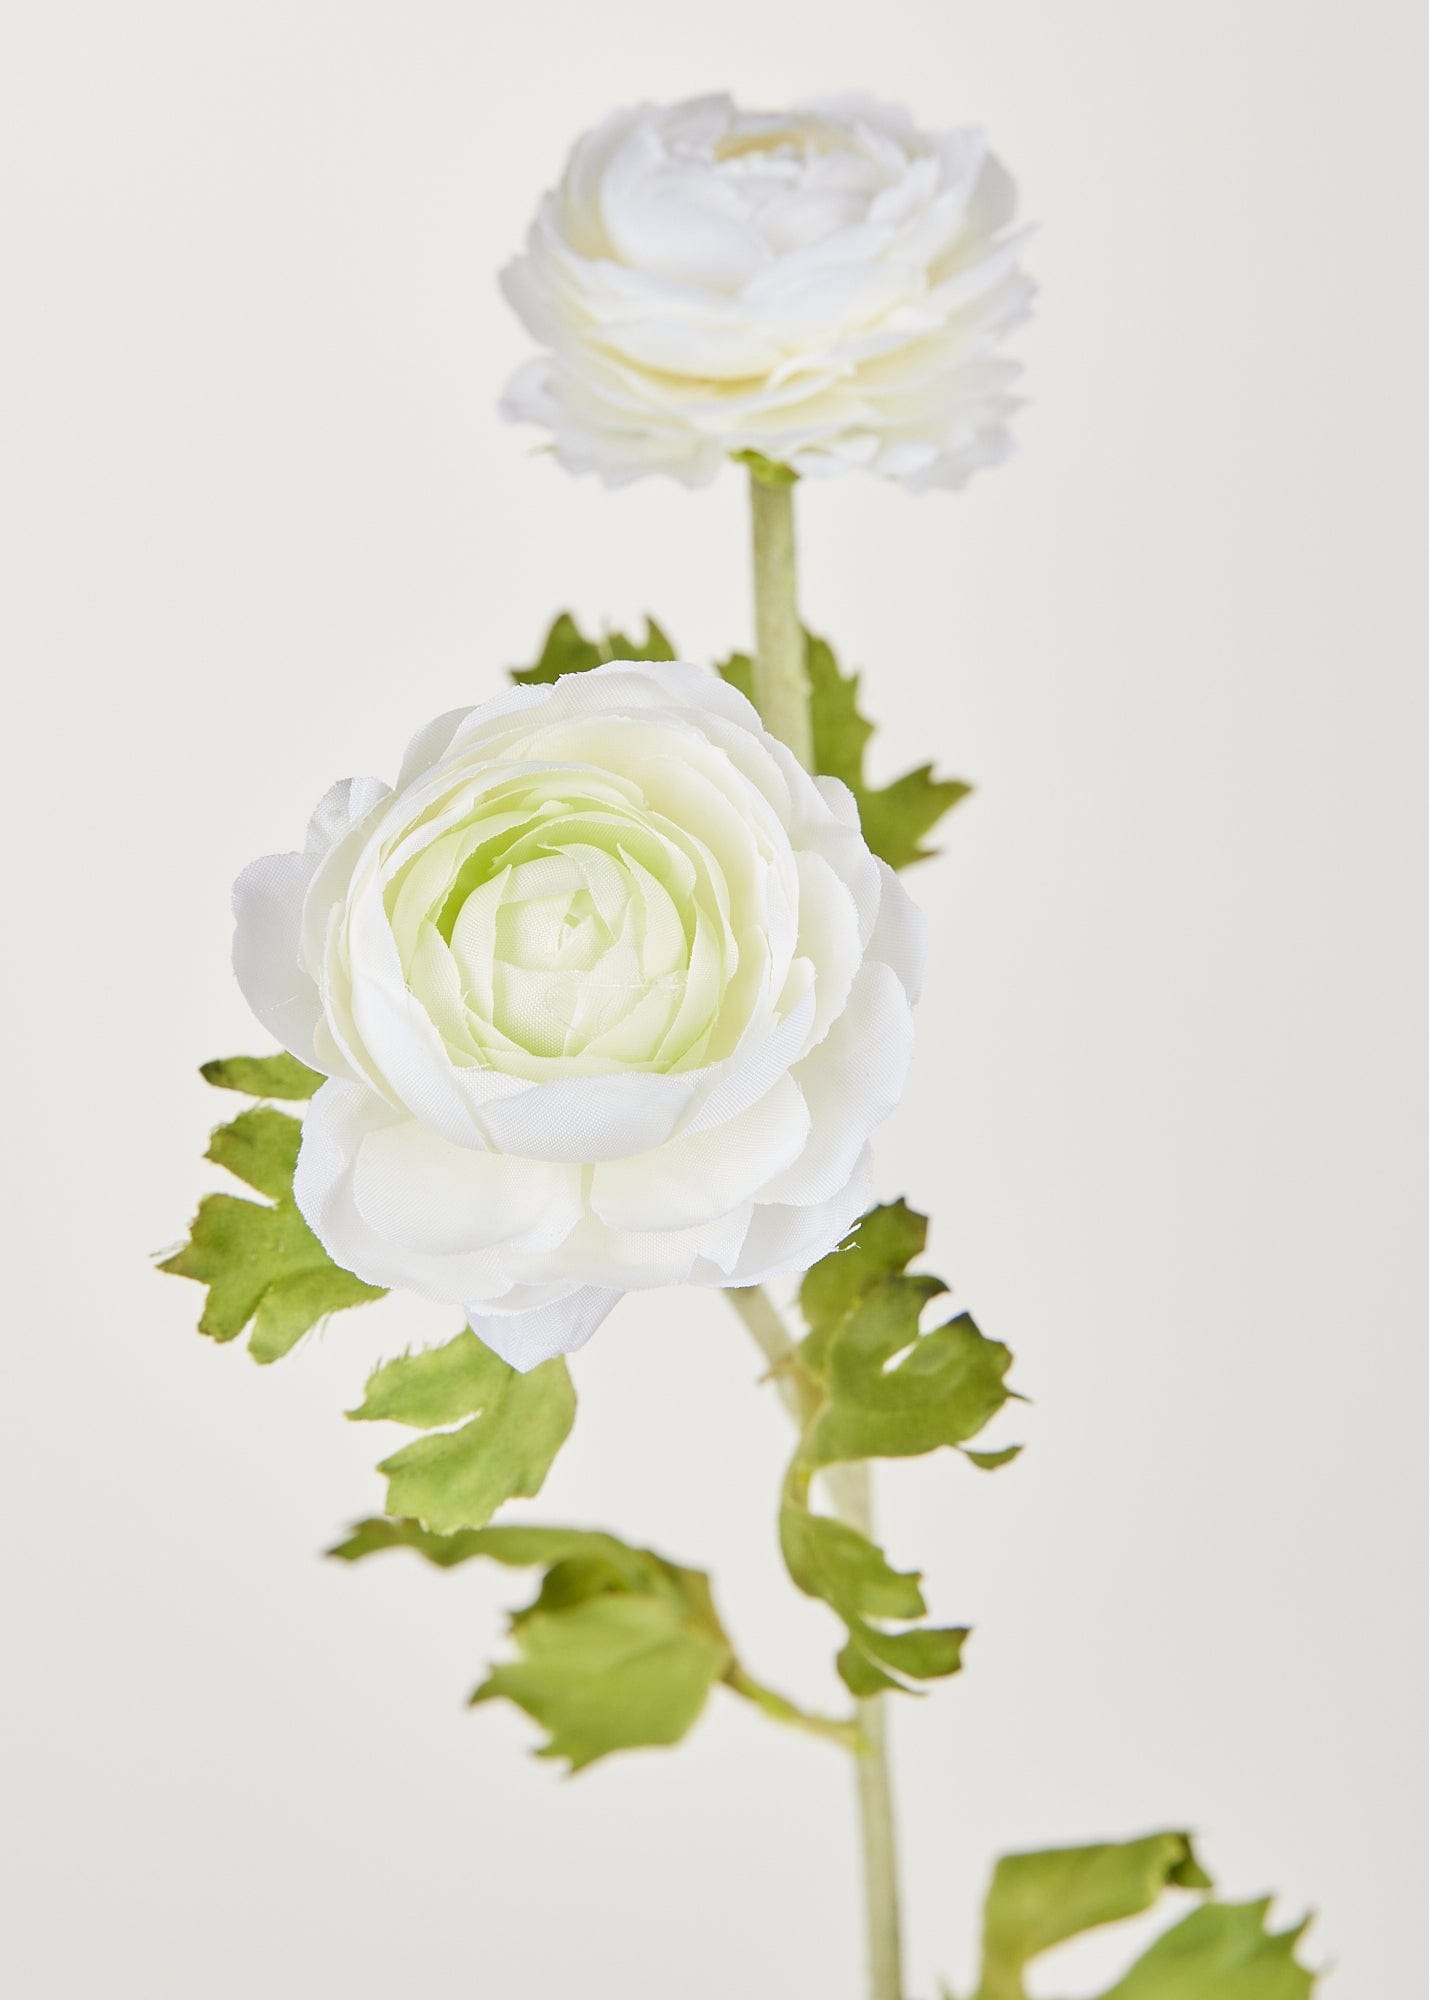 Afloral White Faux Ranunculus Flowers in Closeup View